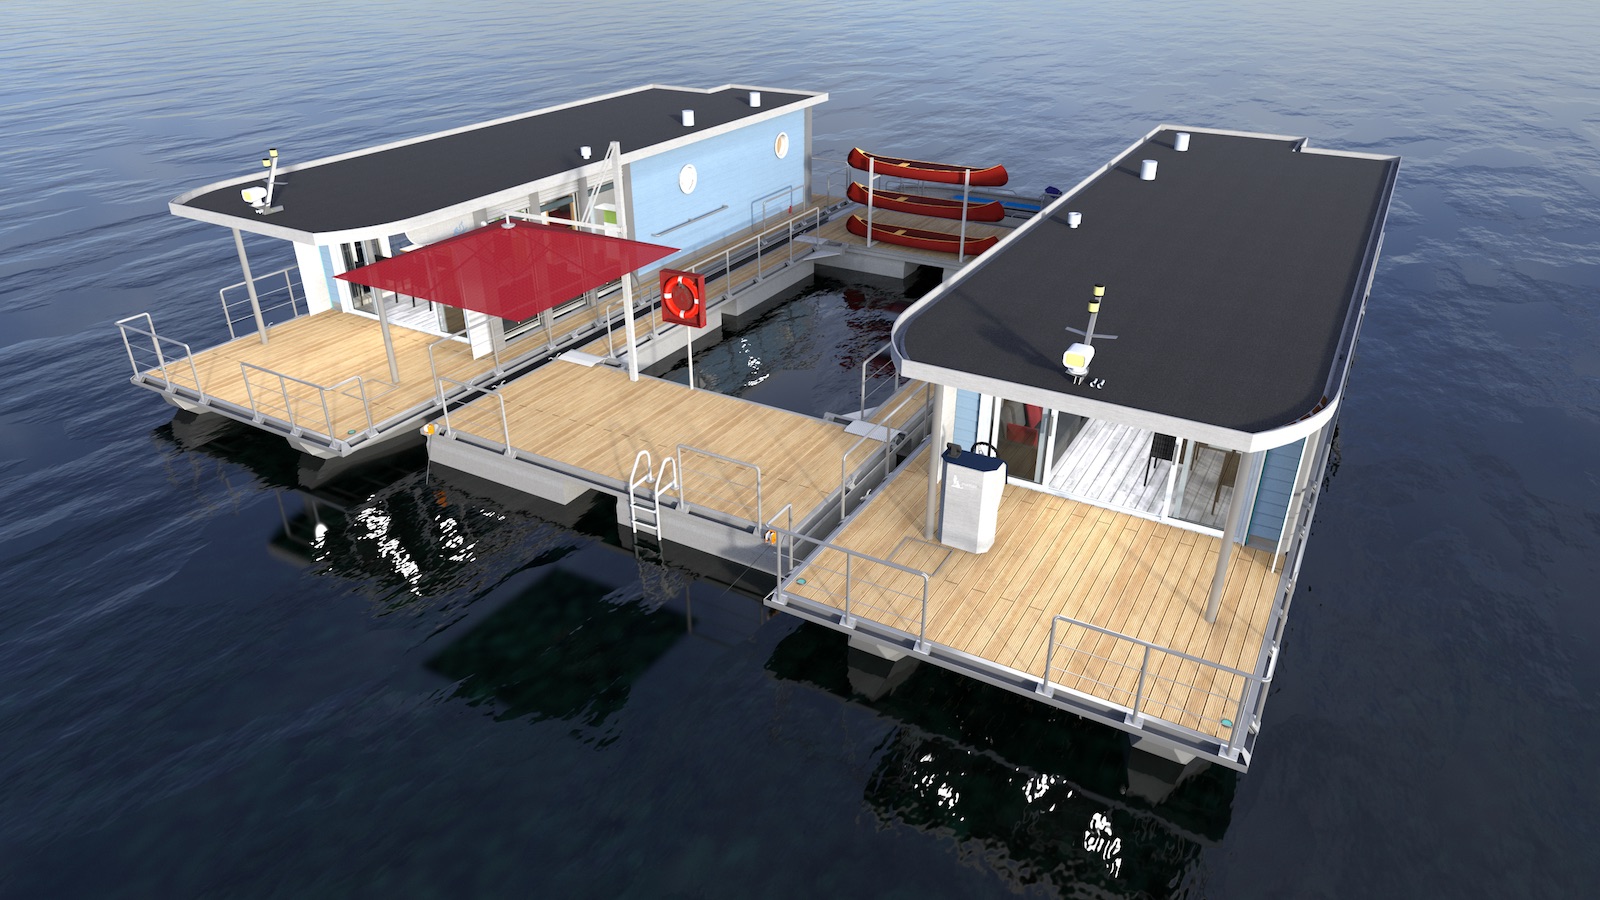 Two houseboats with floating island